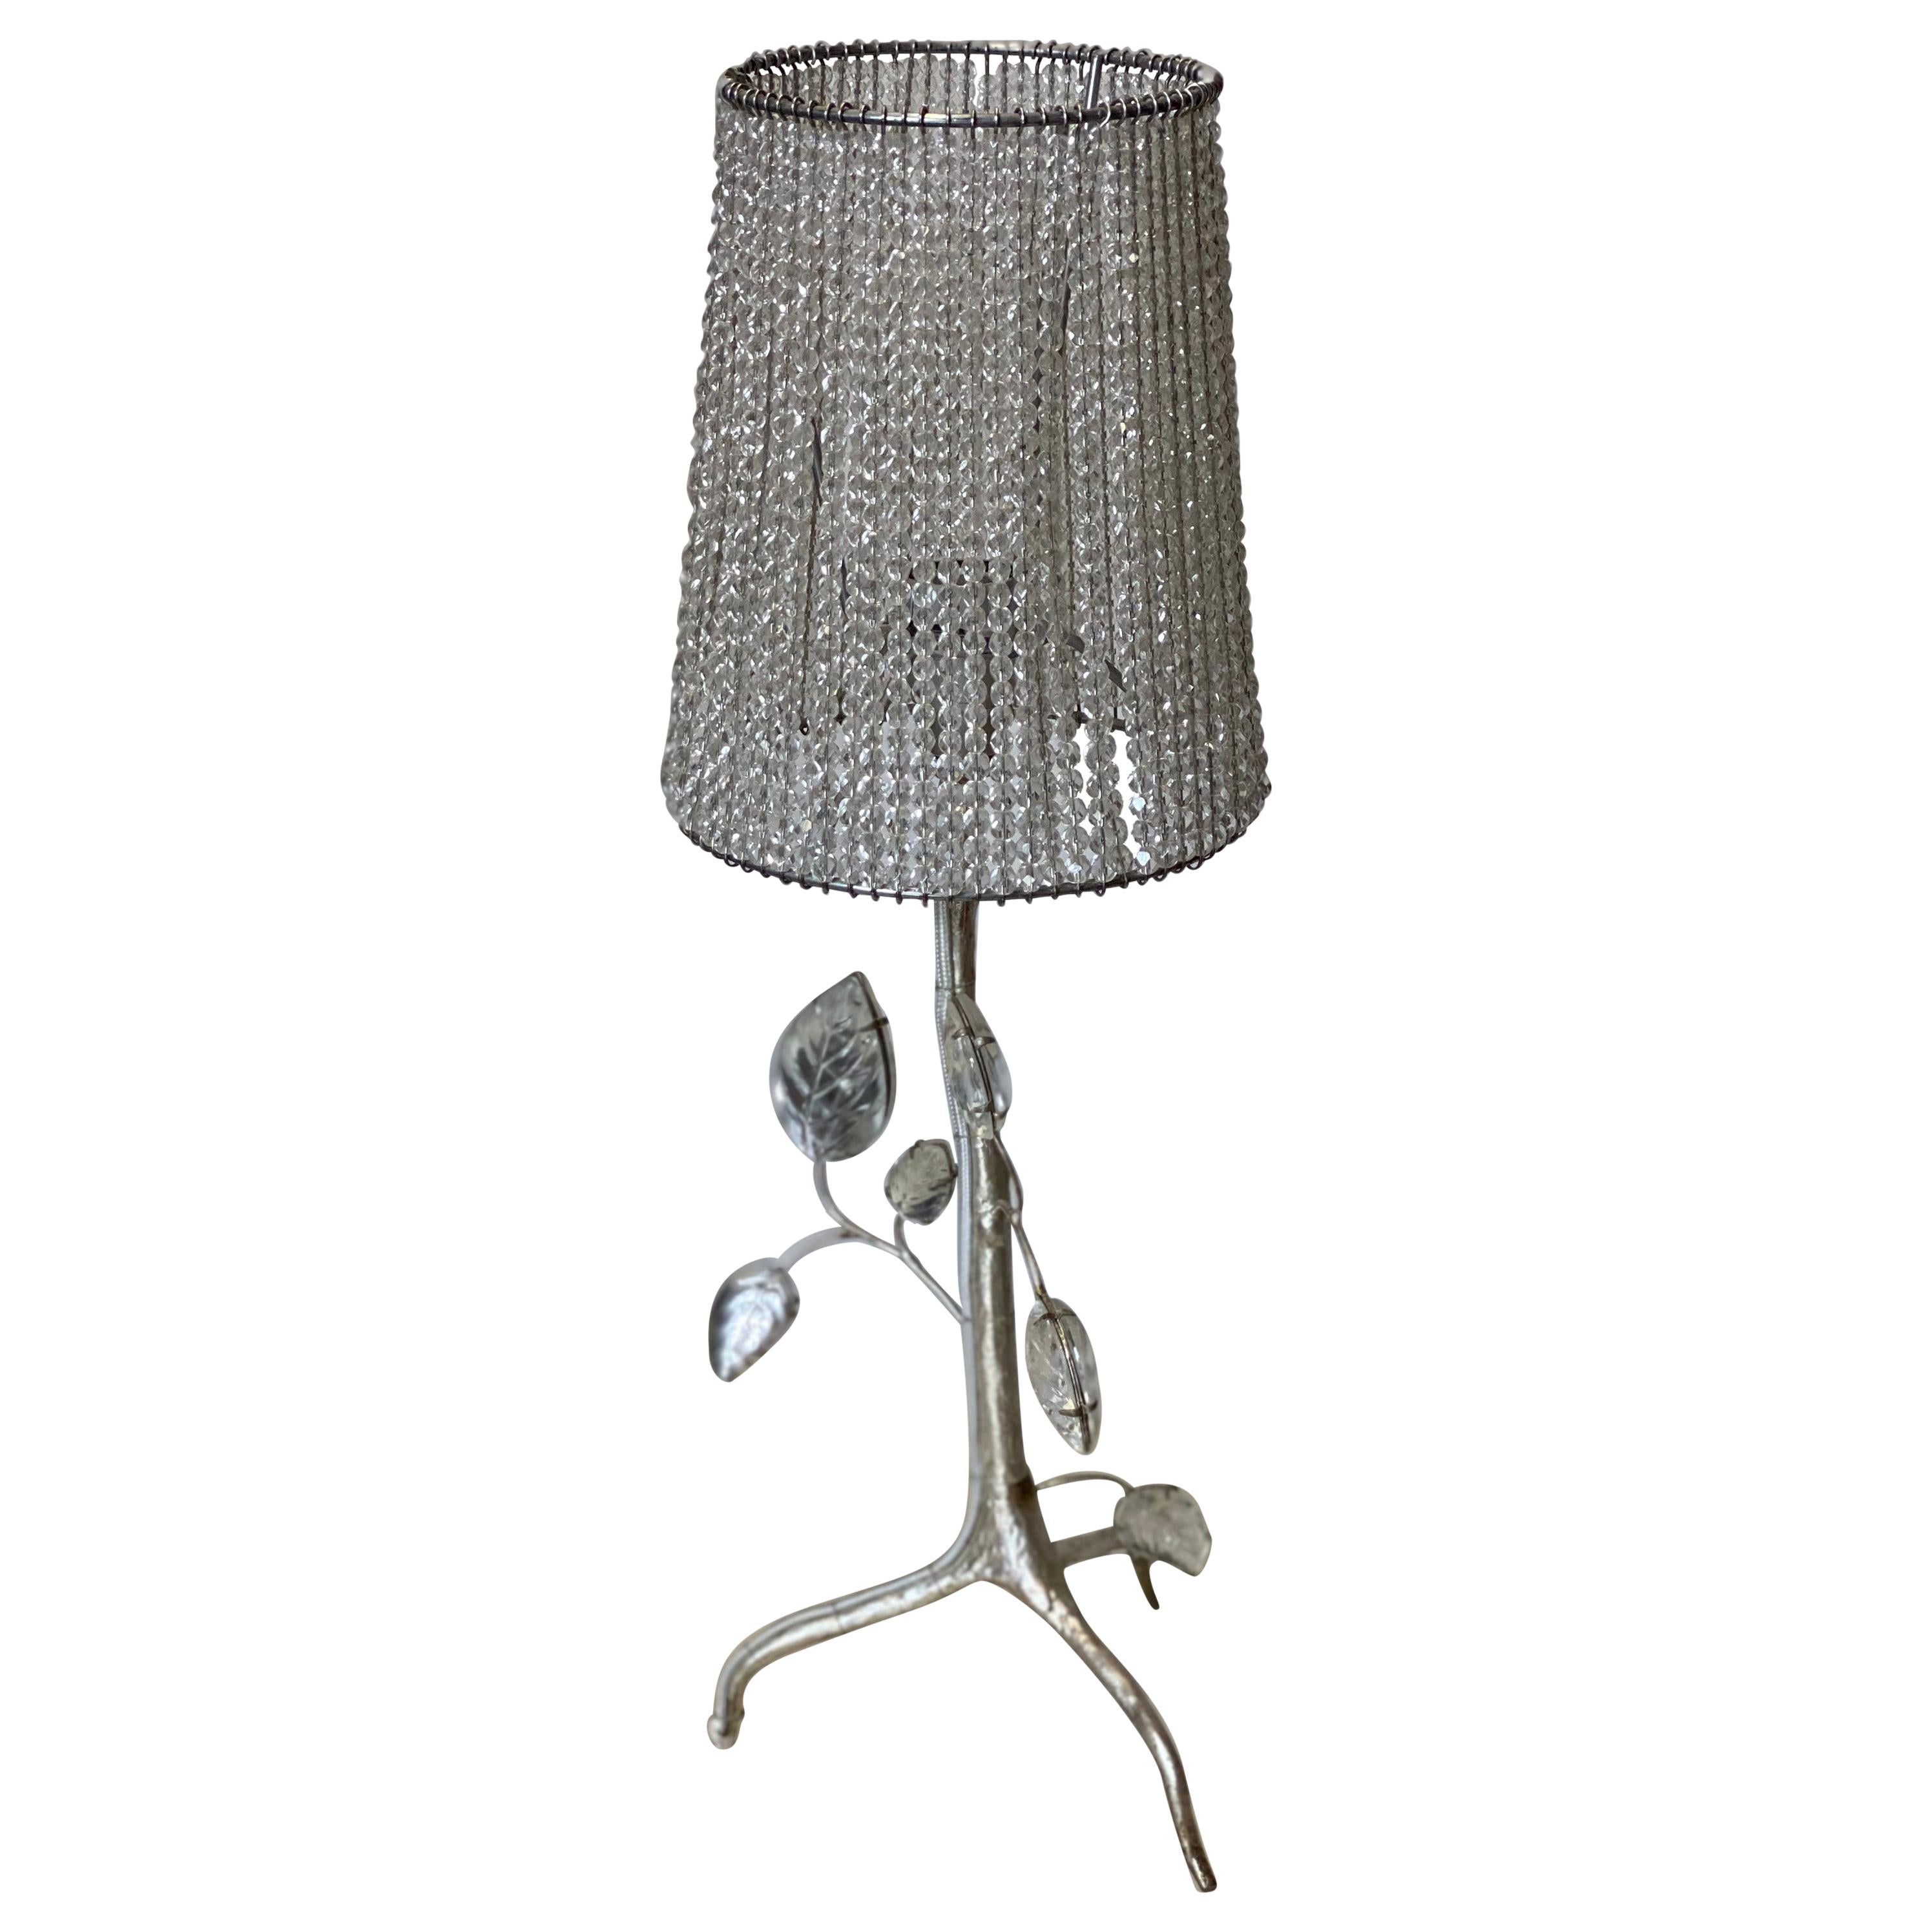 #18115 Maison Baguès lamp.
Can order in both gilt gold or gilt silver. Can be UL listed for an extra fee.

Iron and crystal beads. Handmade.